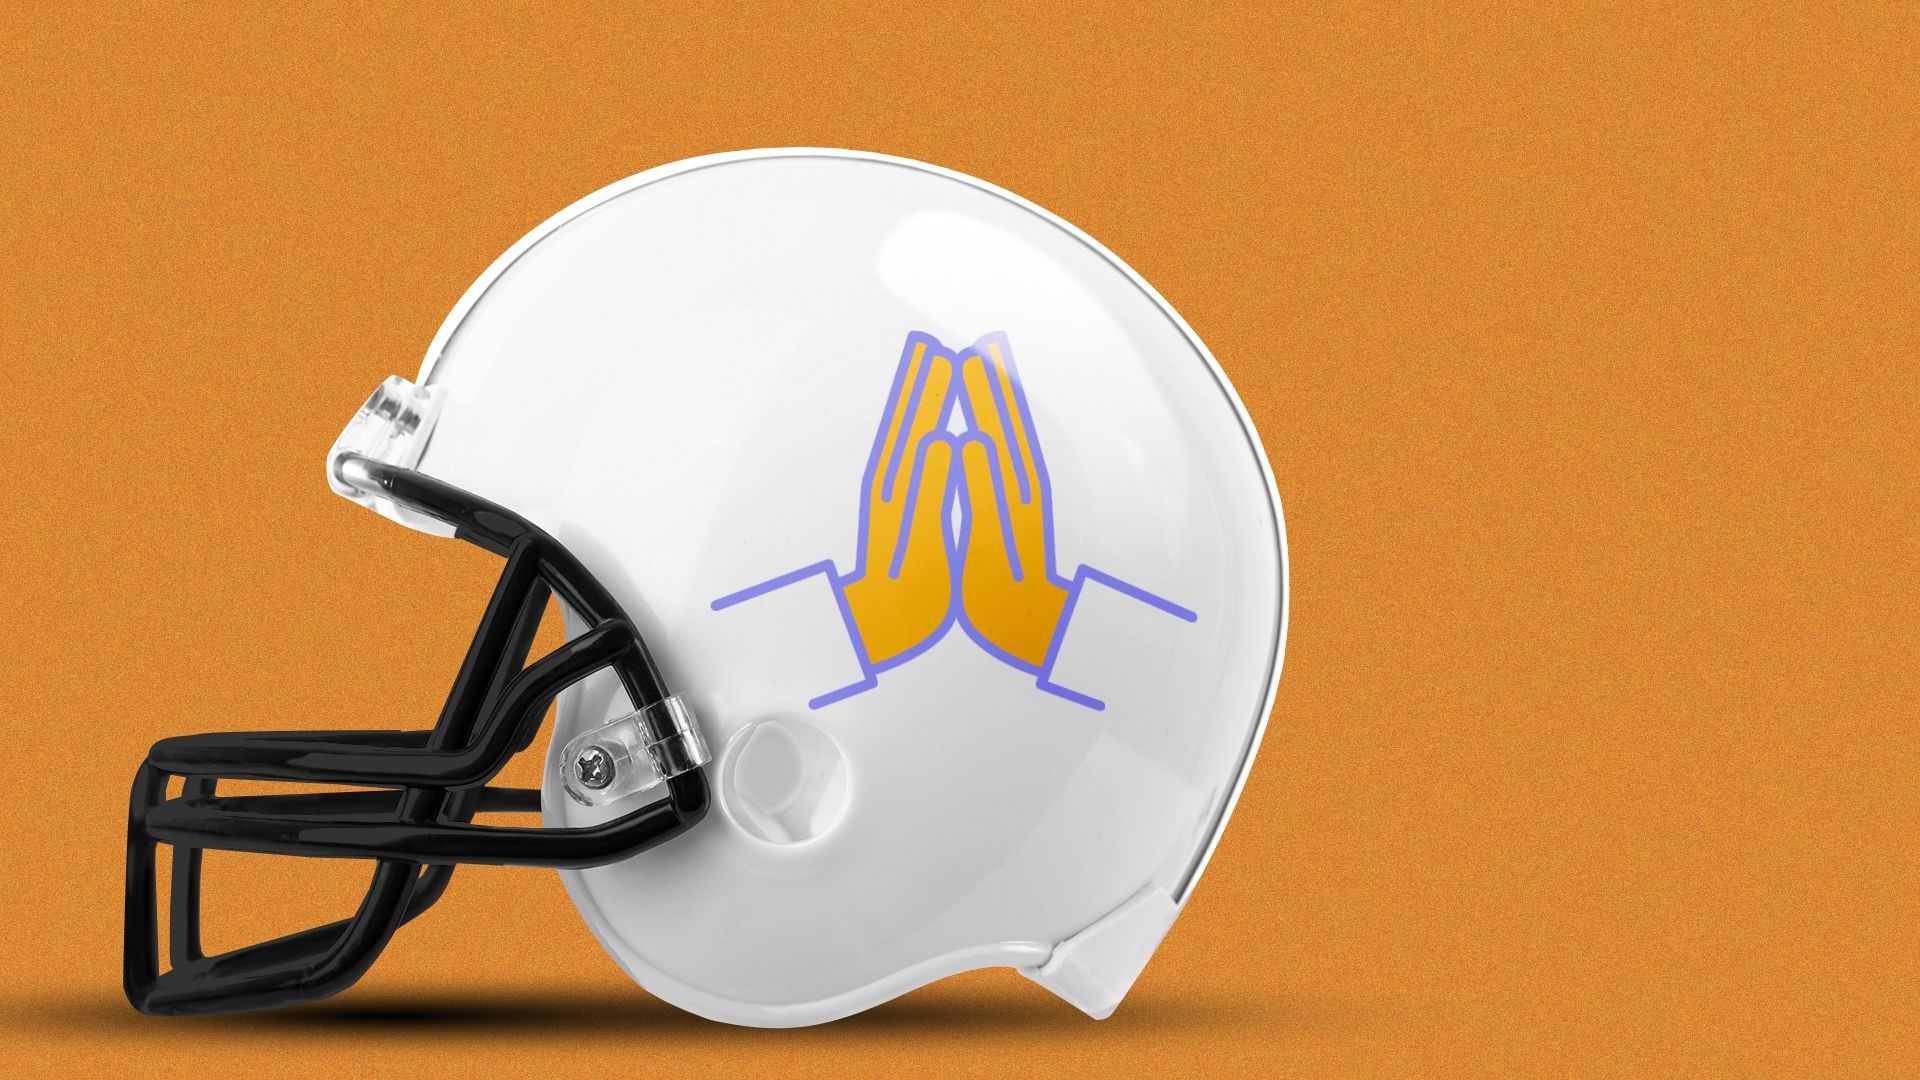 Illustration of a football helmet with a team logo depicting praying hands